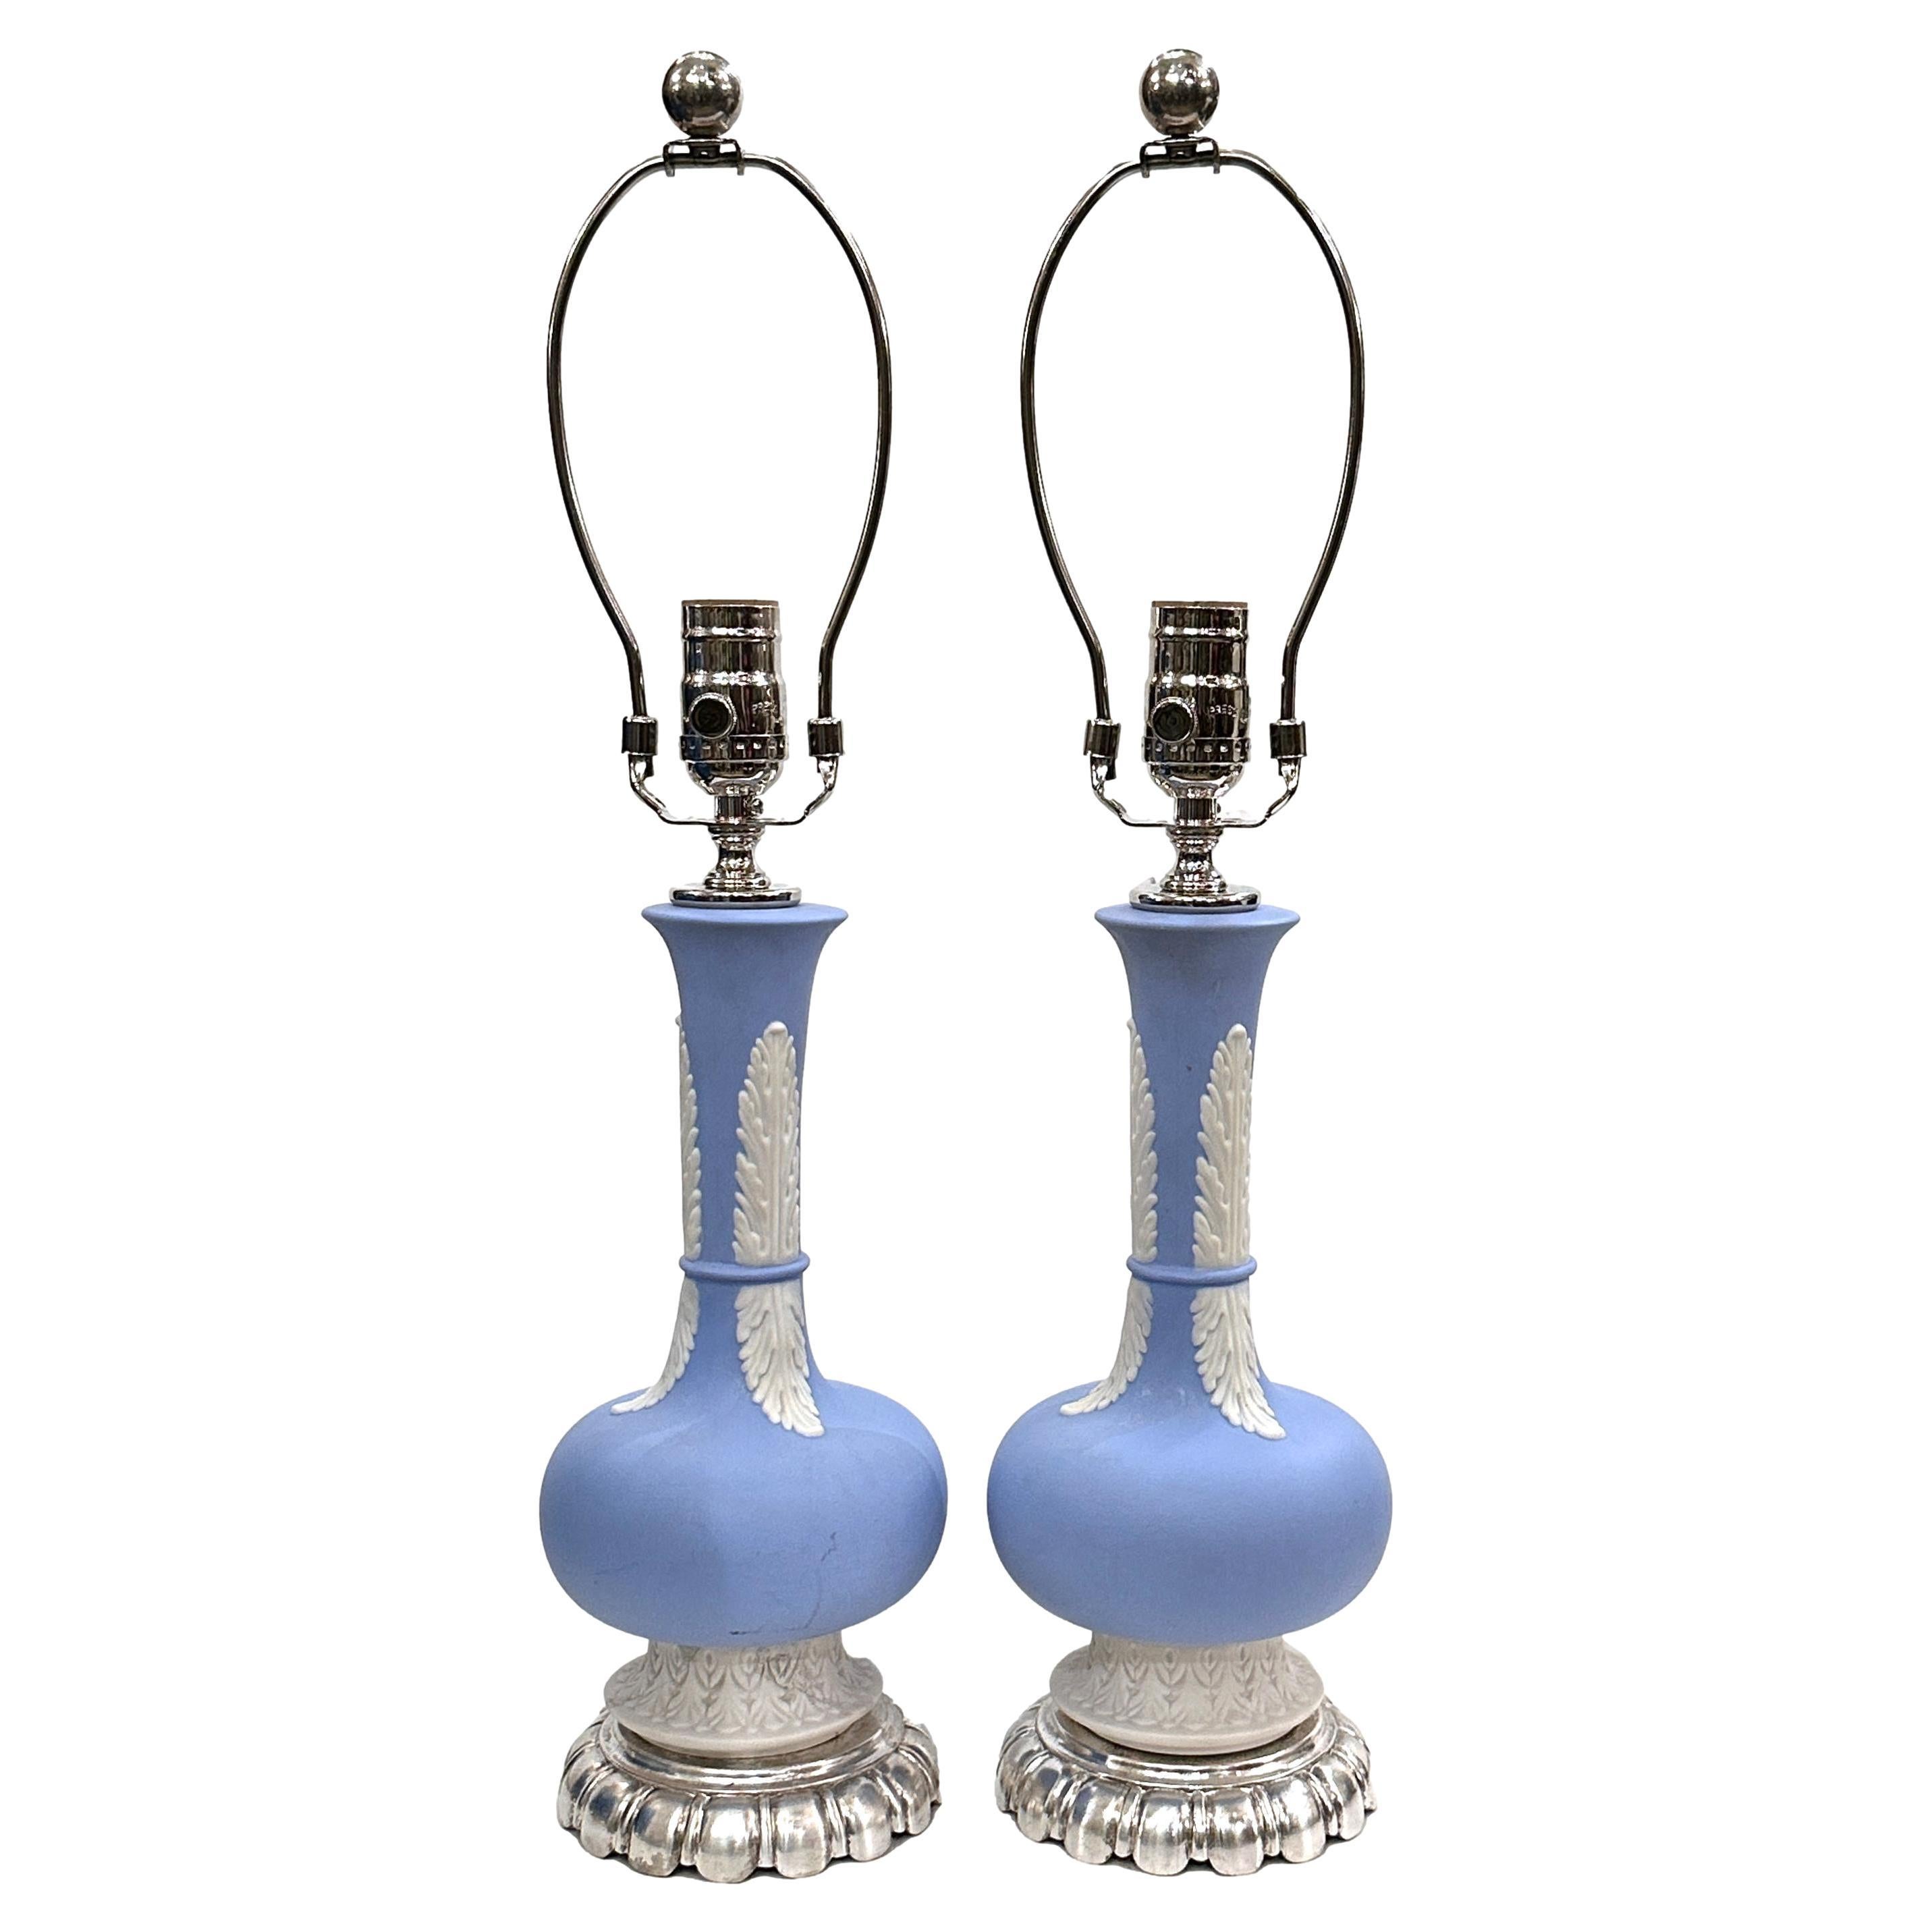 Pair of English Wedgwood Lamps